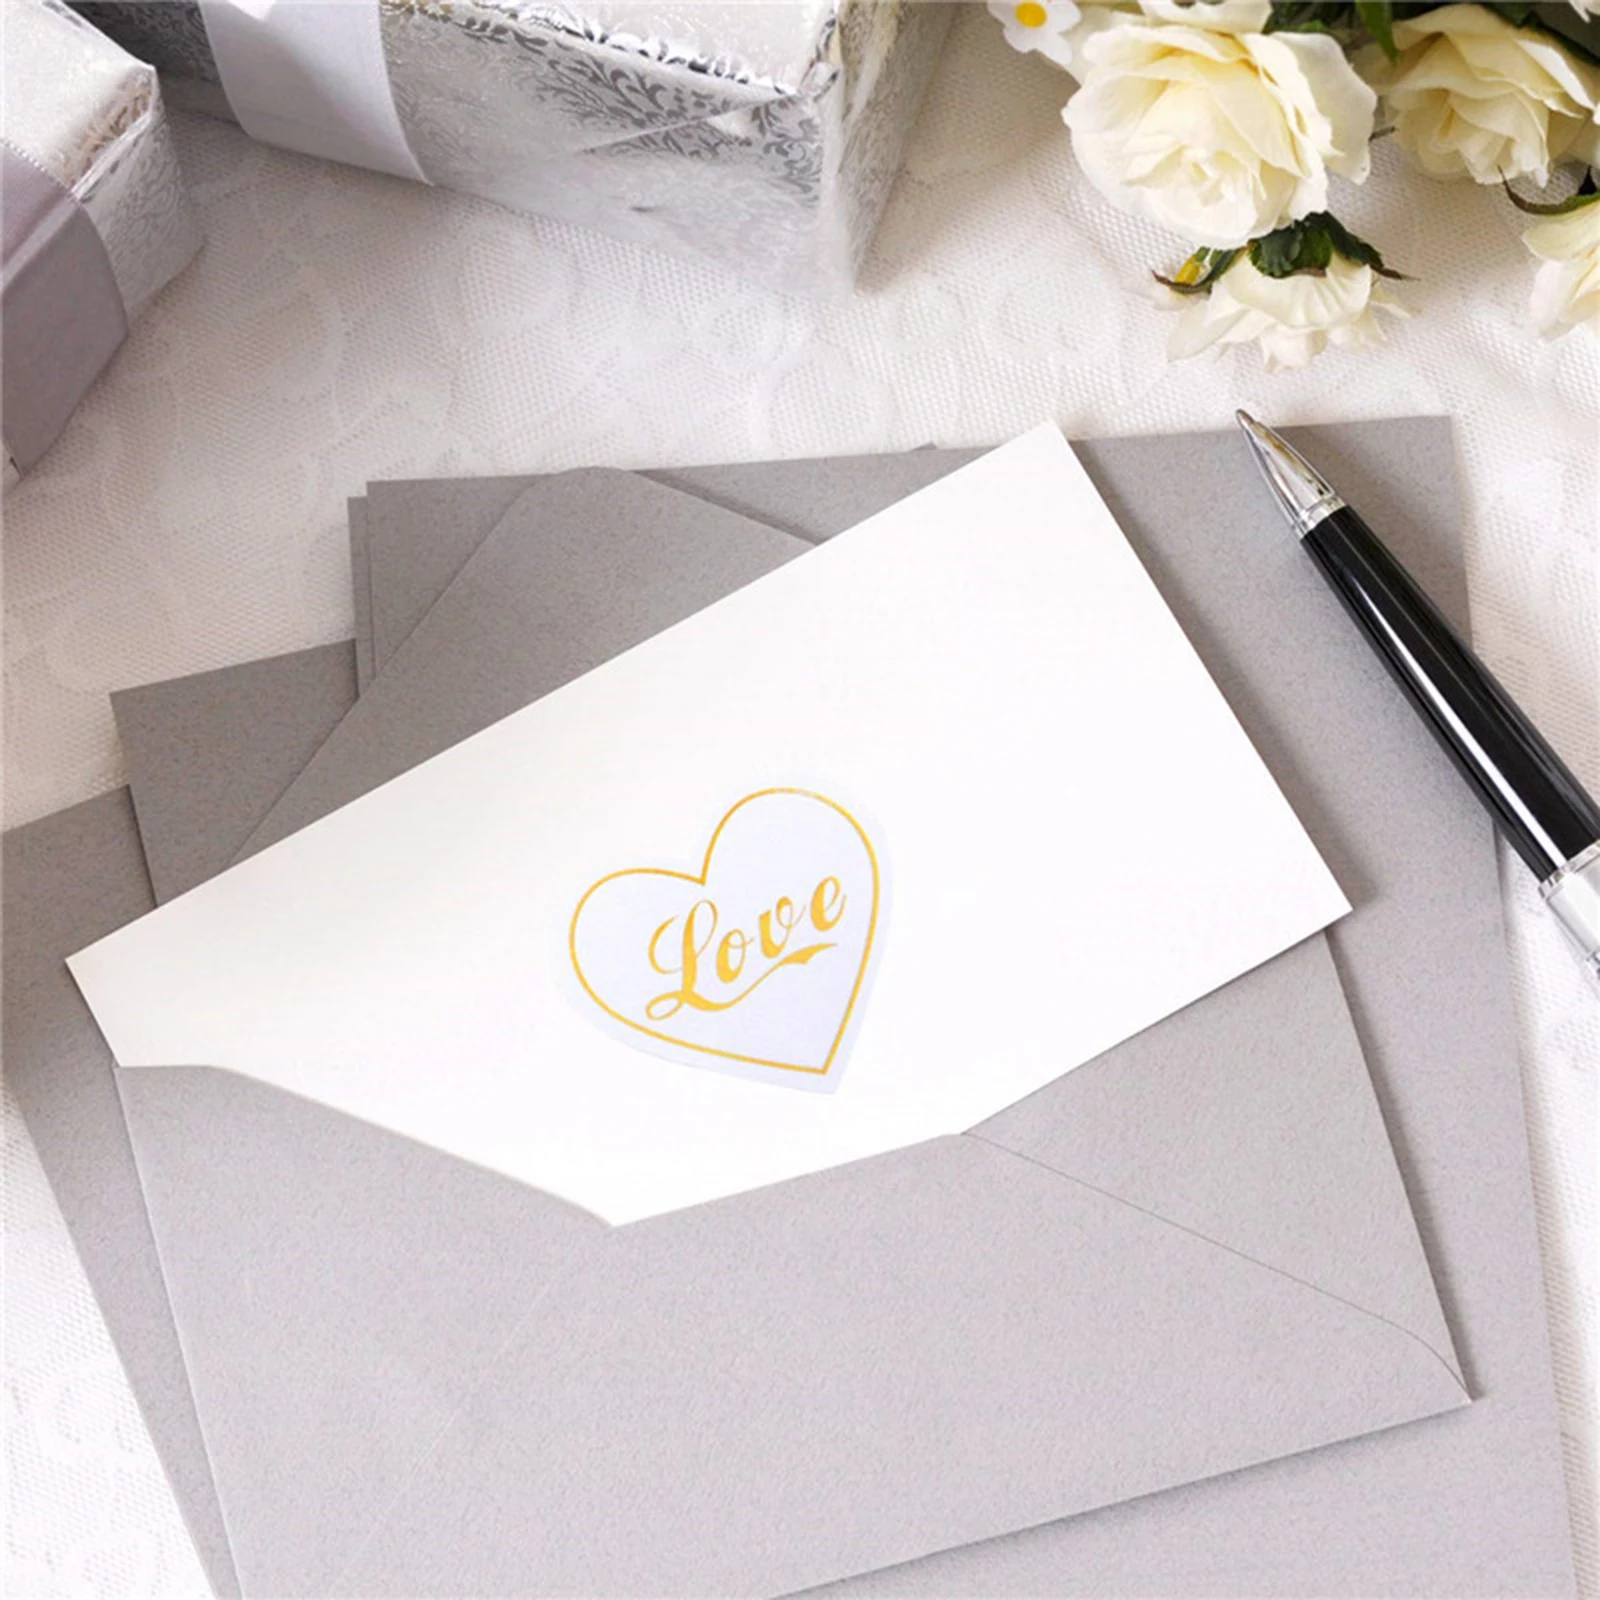 300x Love Stickers 1 Inch Adhesive Label for Envelopes Wedding Birthday